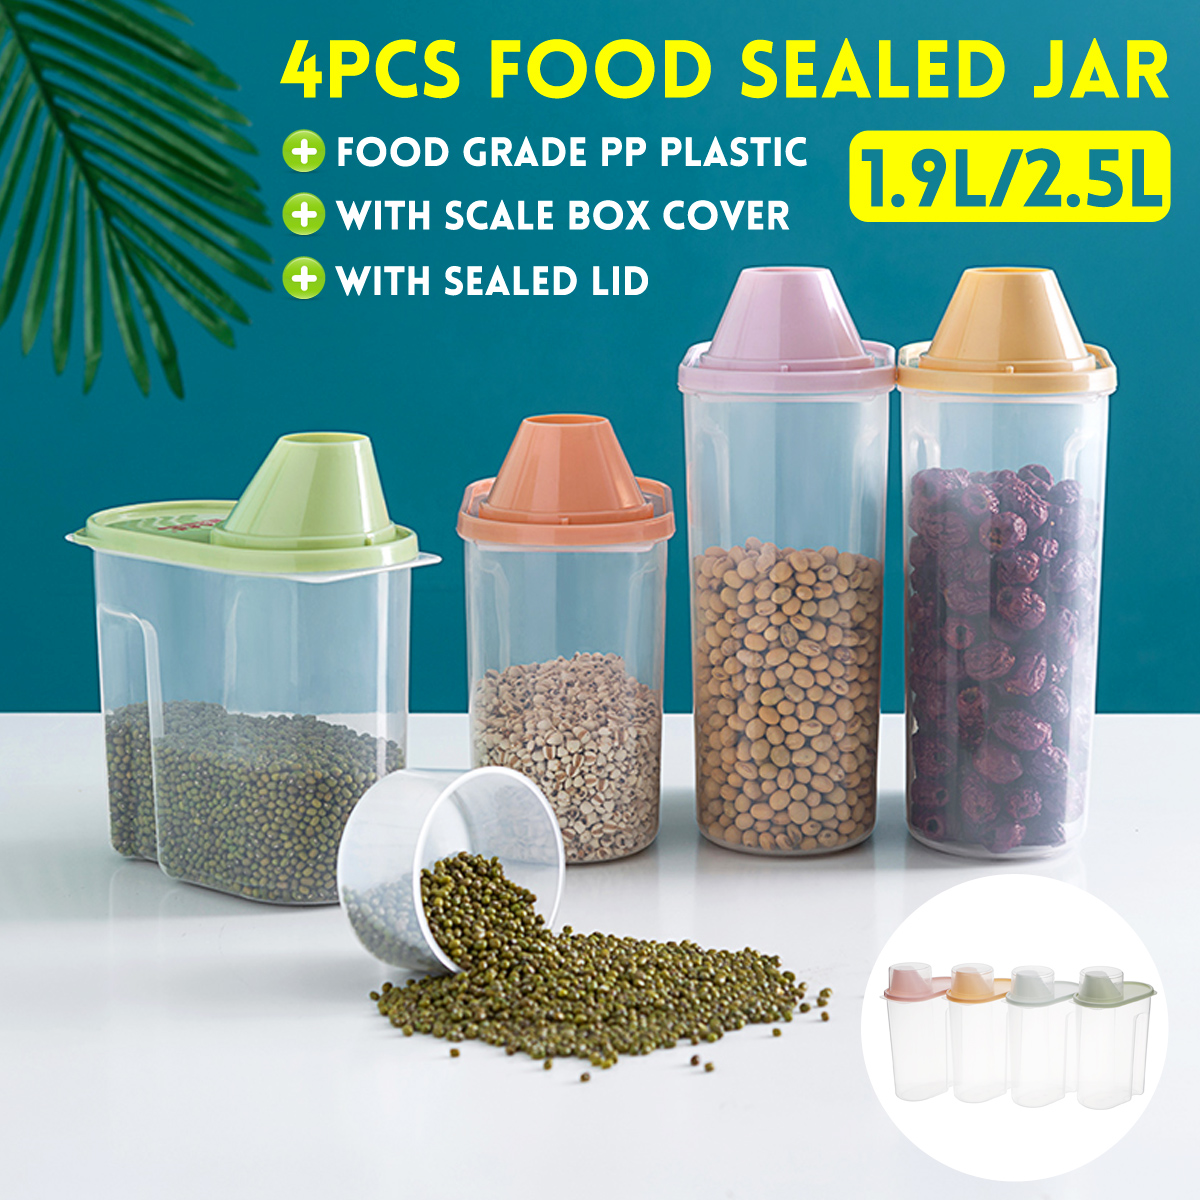 4Pcs-Cereal-Storage-Box-Plastic-Rice-Container-Food-Sealed-Jar-Cans-Kitchen-Grain-Dried-Fruit-Snacks-1730653-1